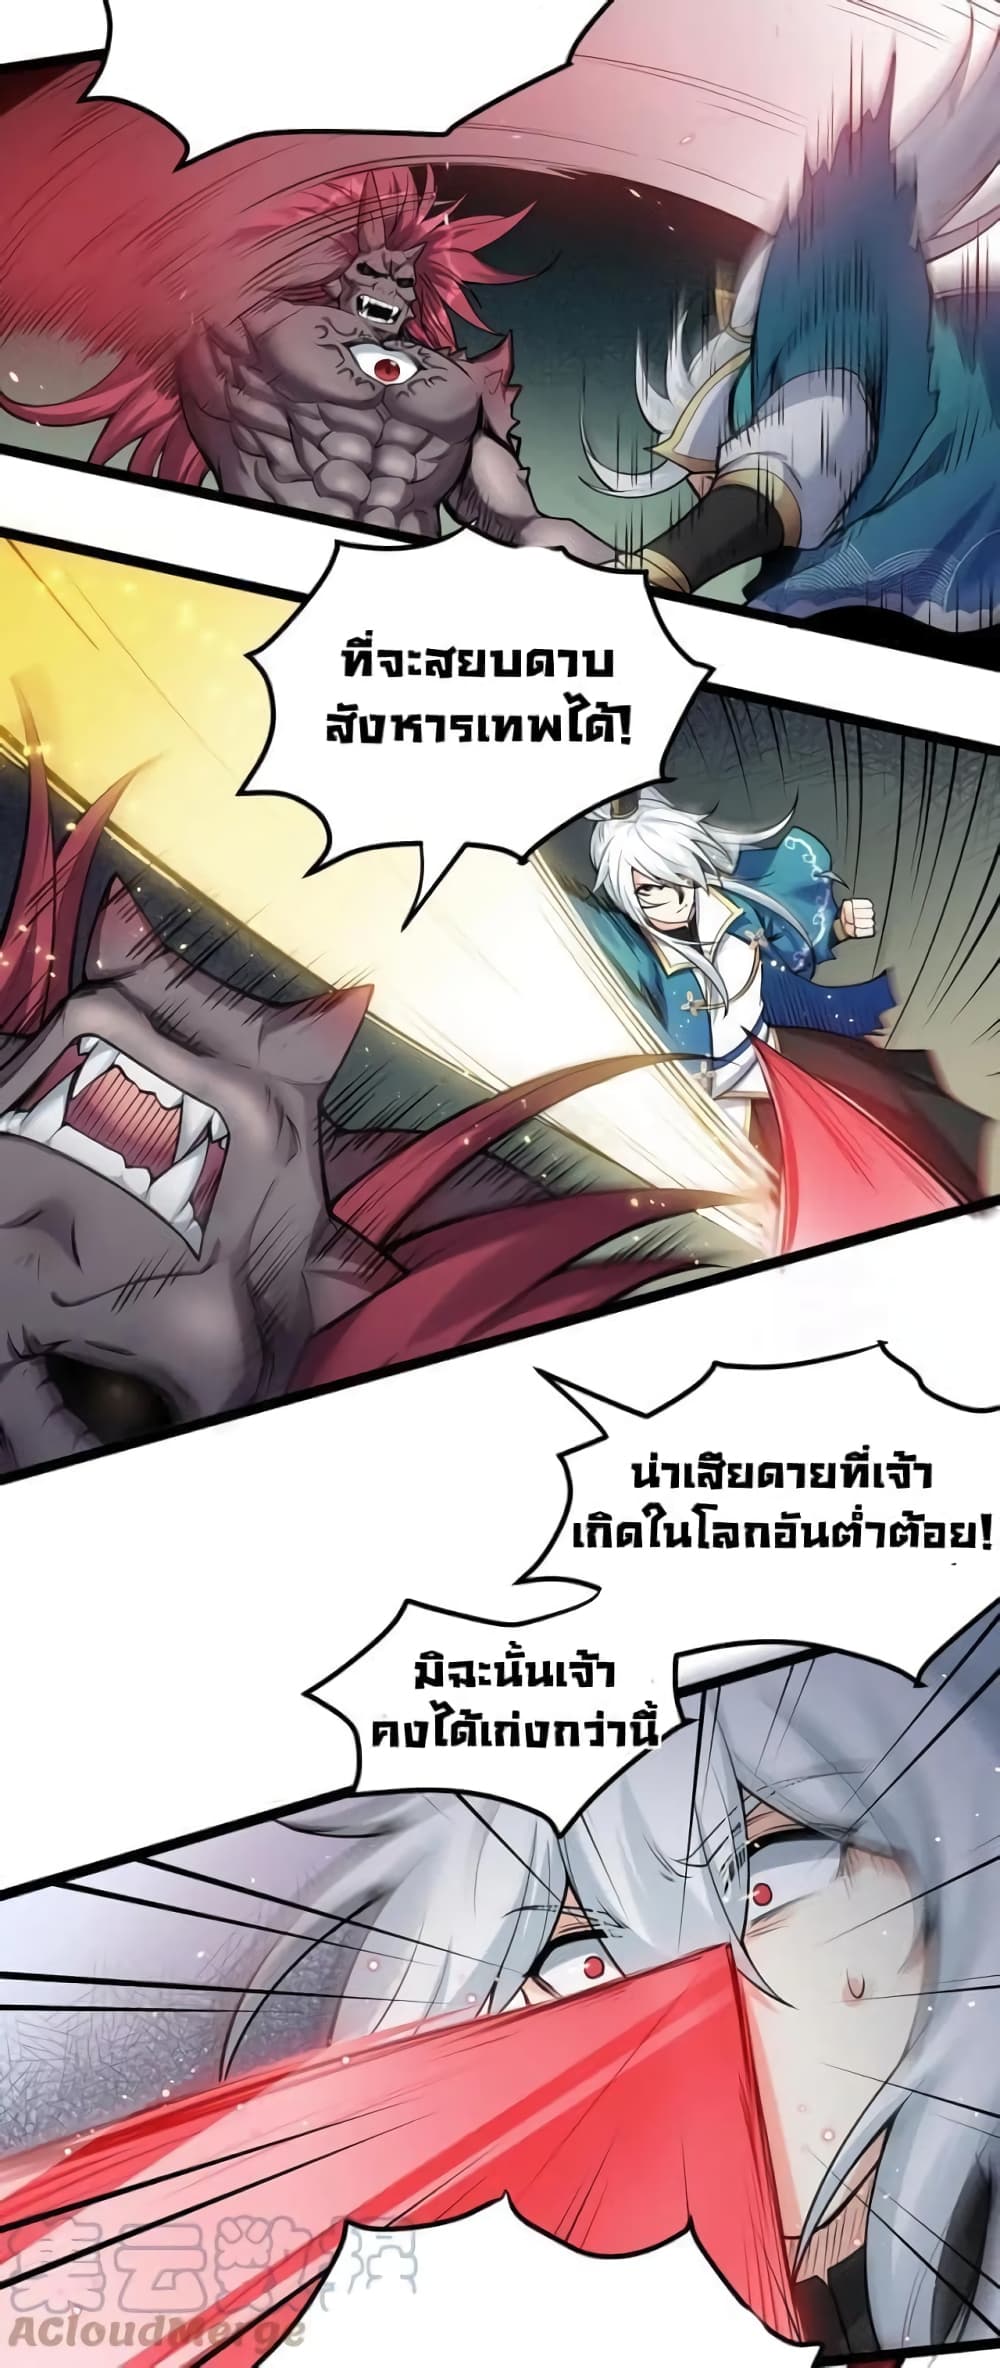 Godsian Masian from Another World ตอนที่ 90 (21)